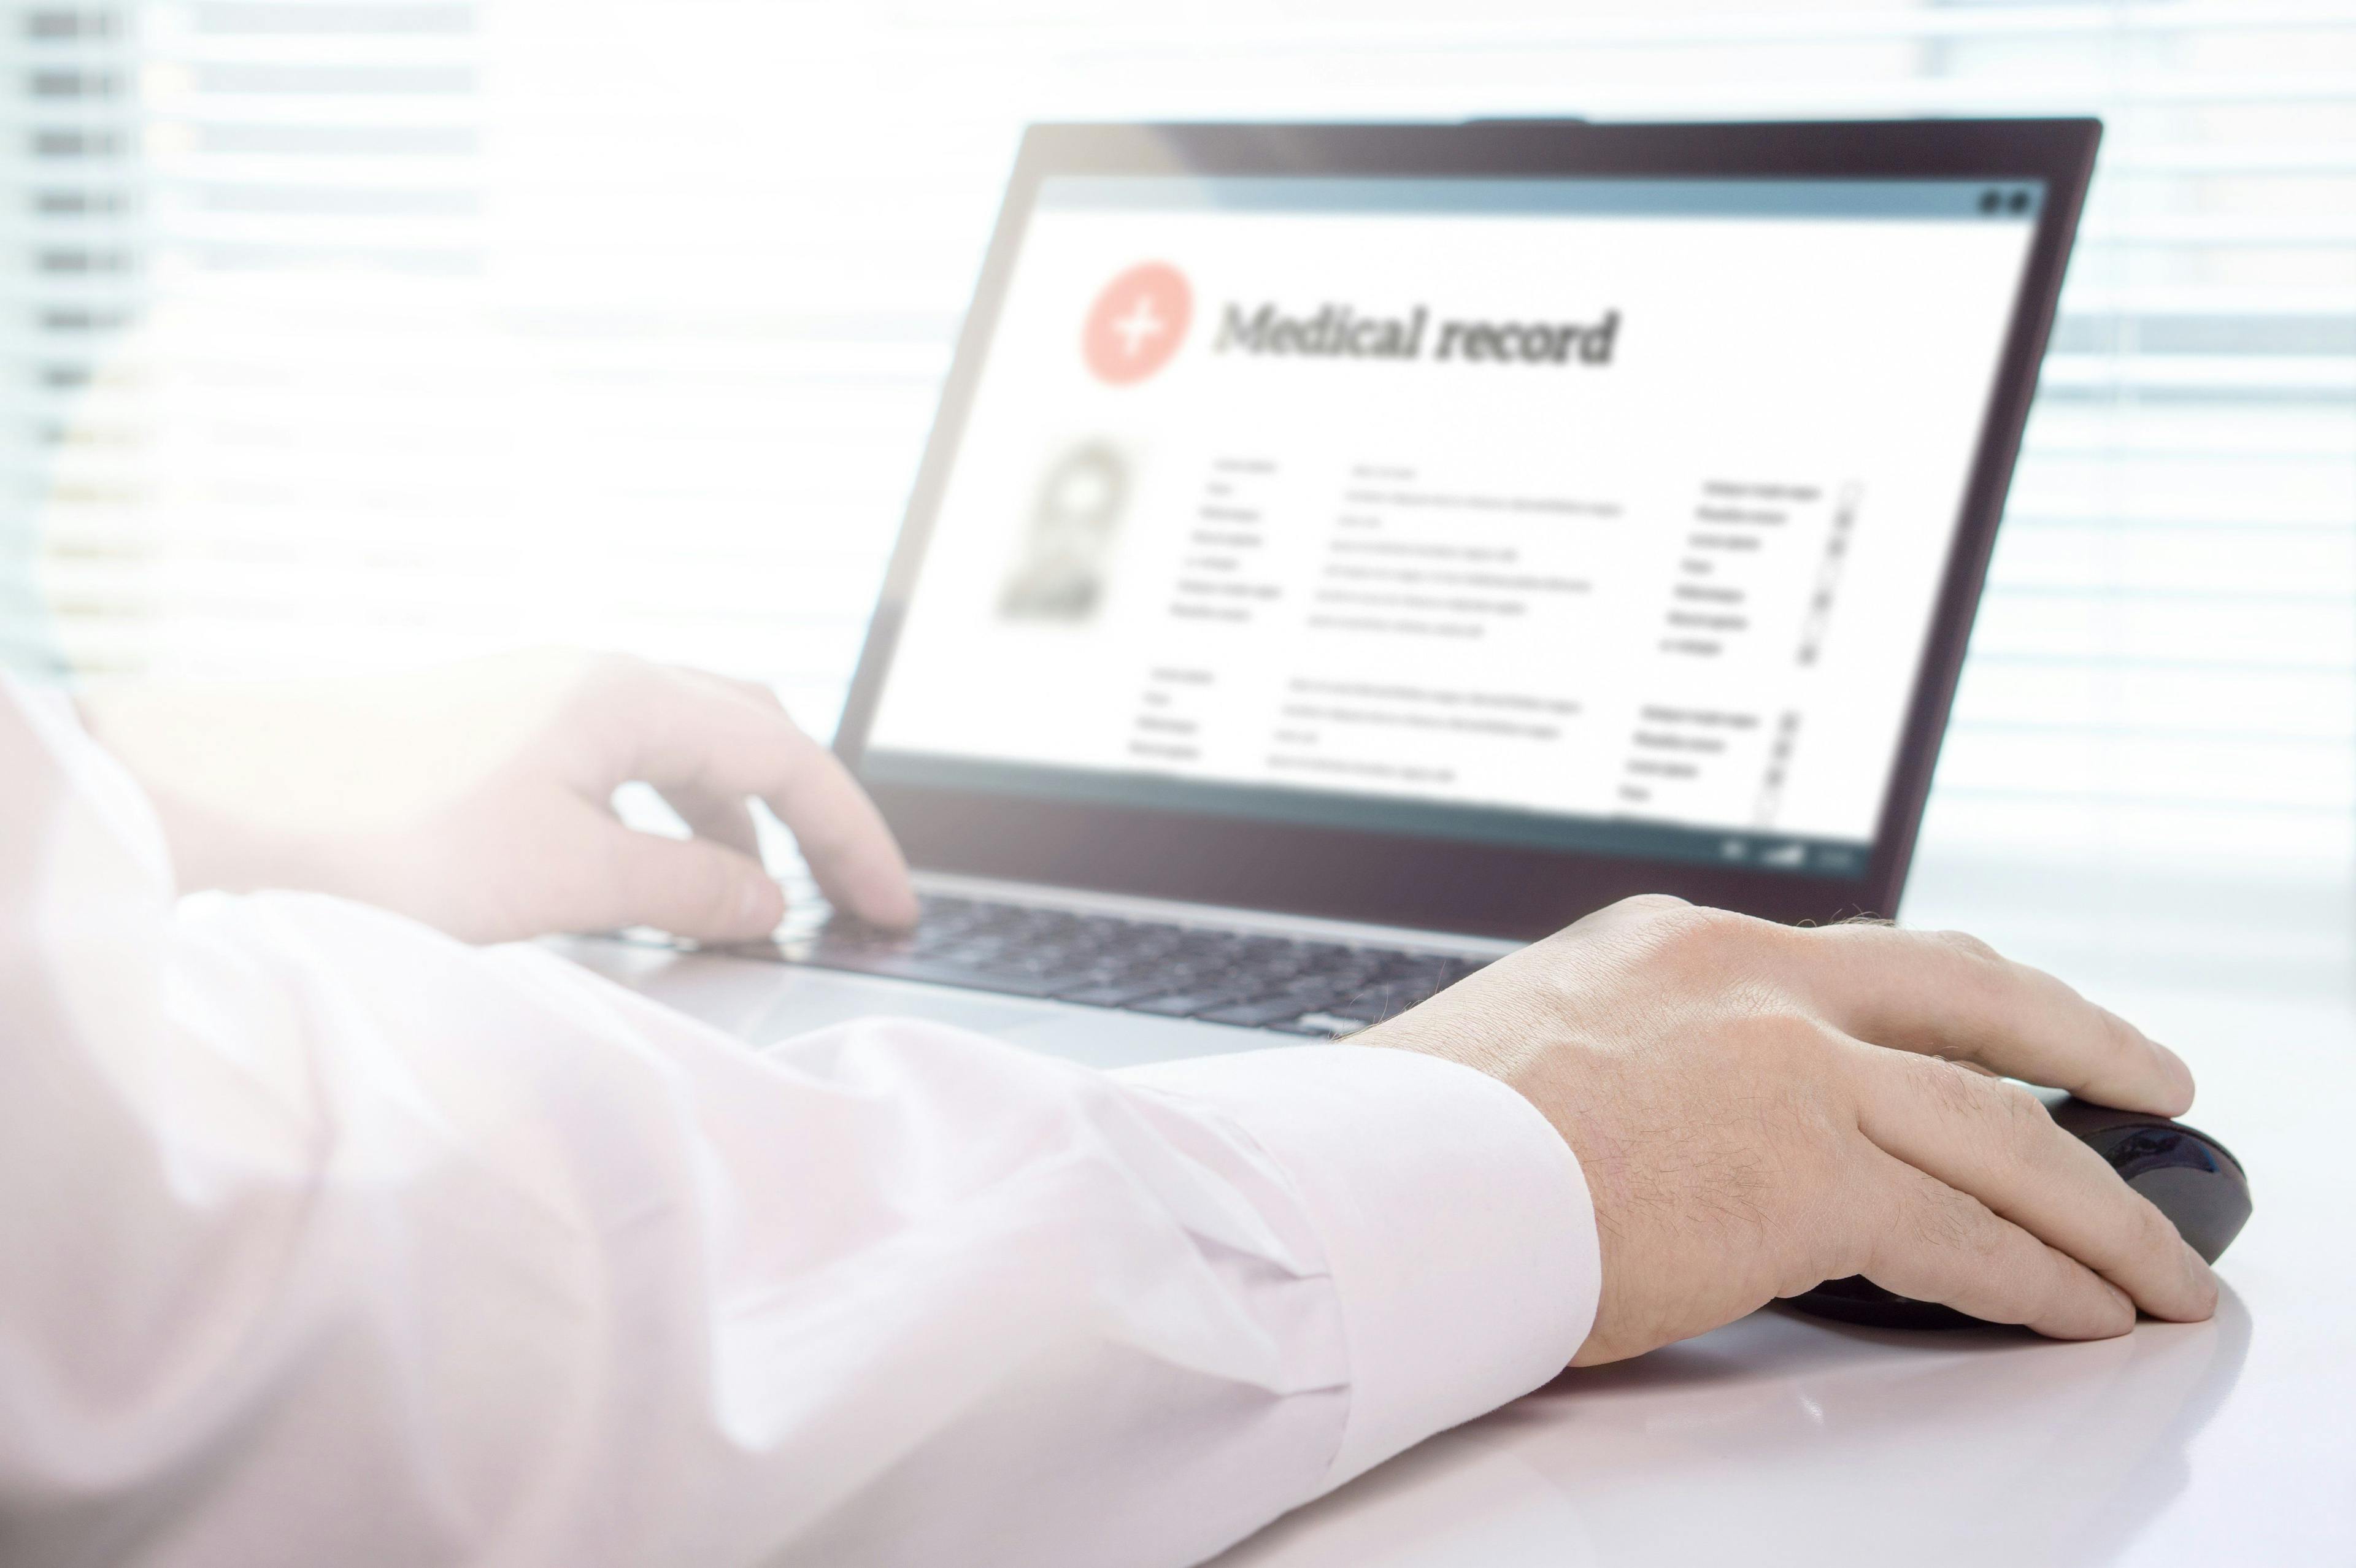 Get paid for using the patient portal